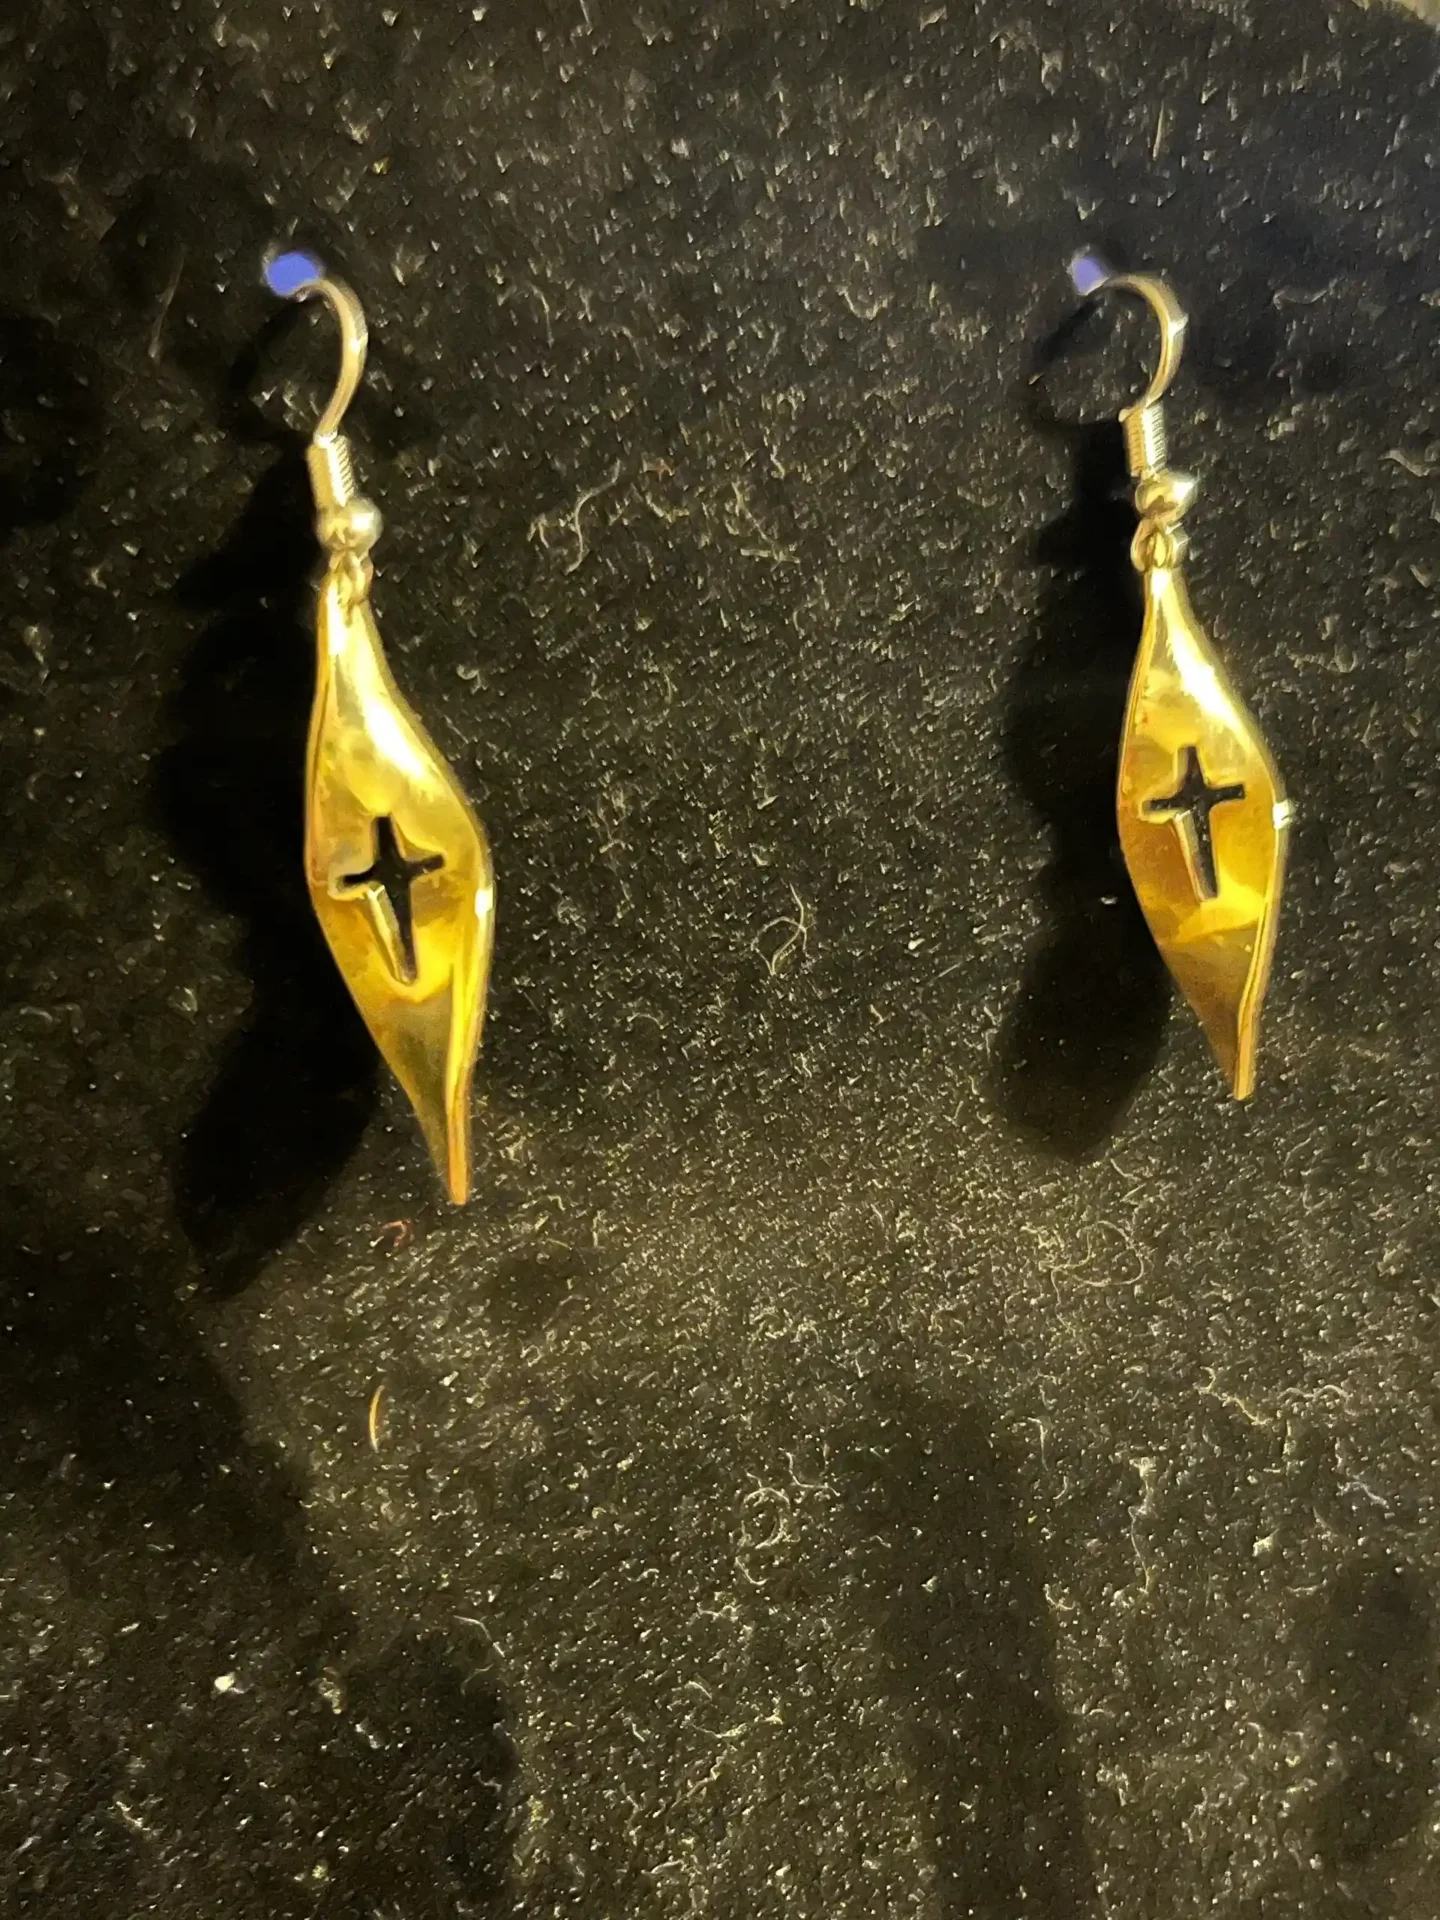 A pair of gold earrings with black cross on them.